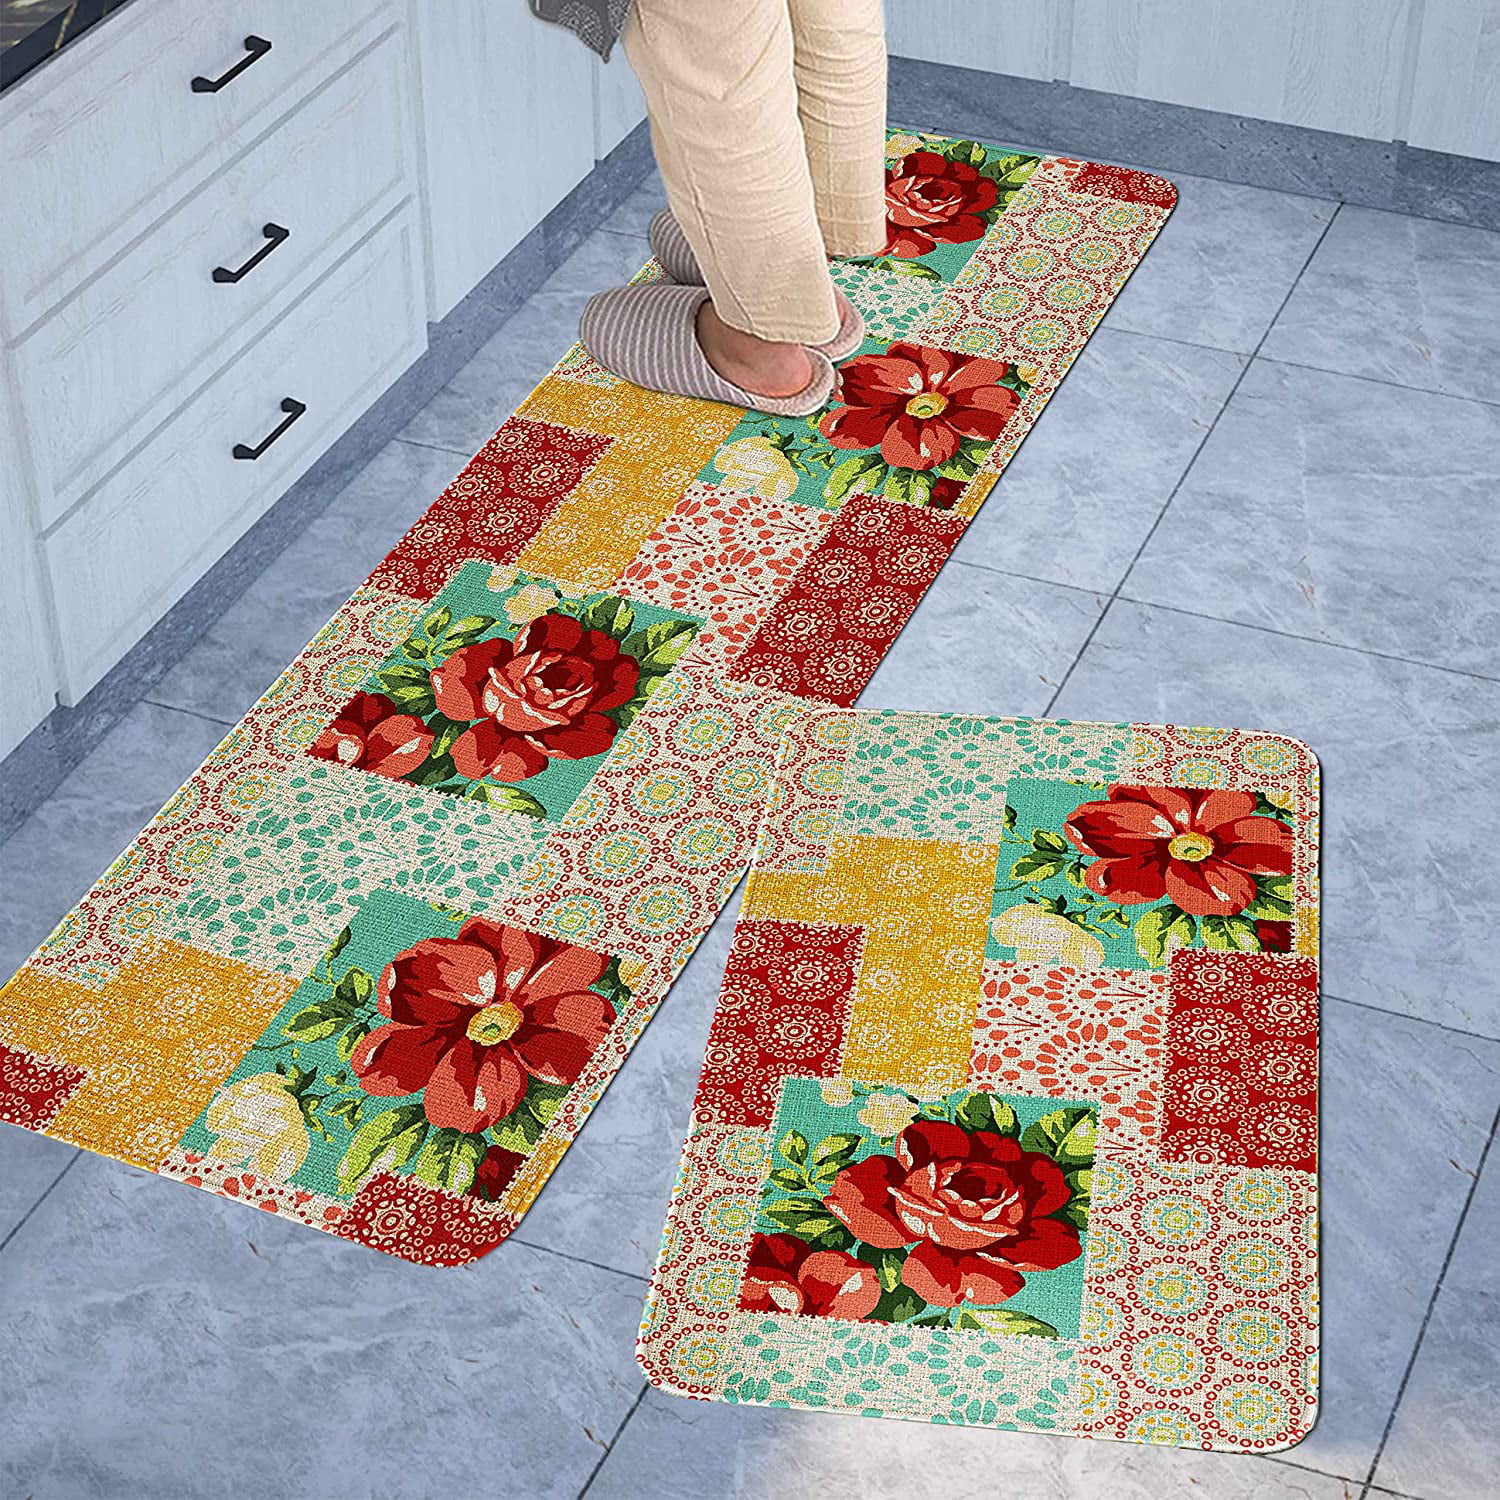  Sage Green Kitchen Mat Rug Set of 2- Plant Floral Butterfly  Kitchen Rugs with Runner Kitchen Decor Accessories Things, Kitchen Rug Mat-  Leaves Rugs for Home Kitchen Large- 17x30 and 17x47